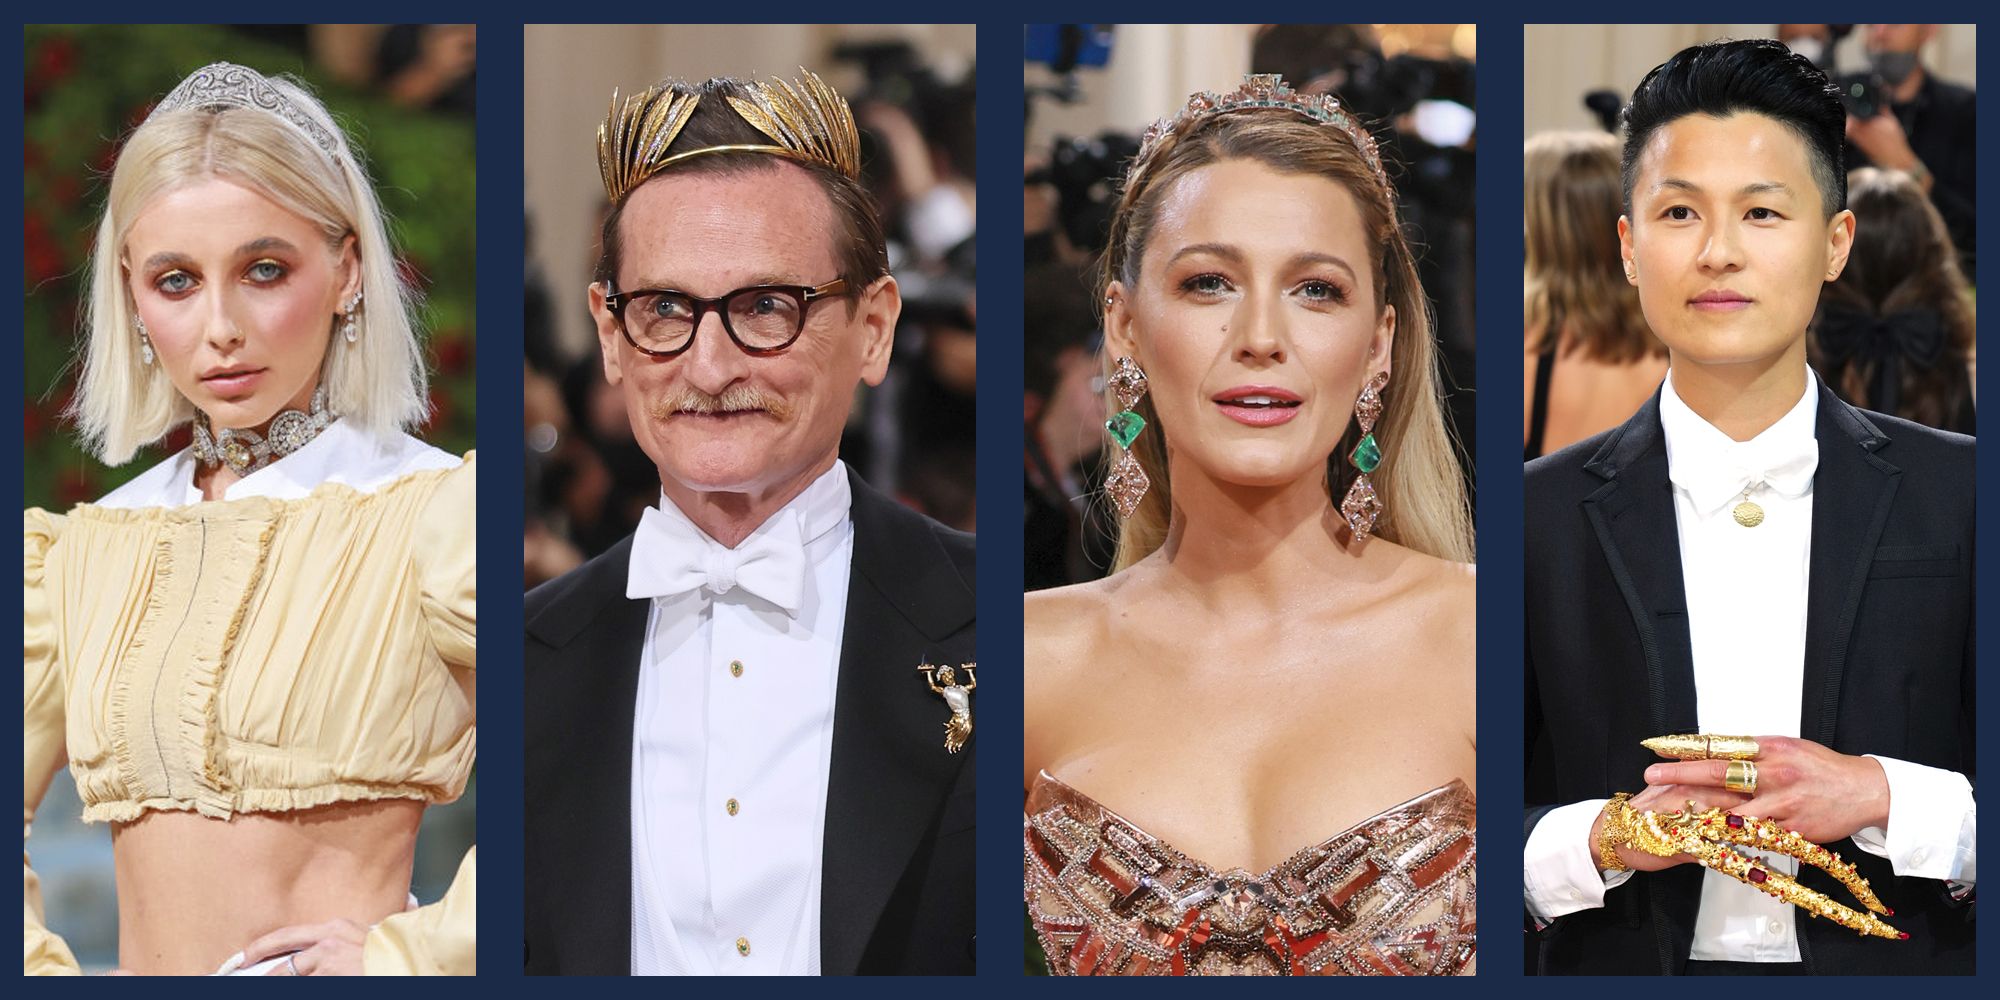 The Tiaras and Pendant Earrings at the Met Gala